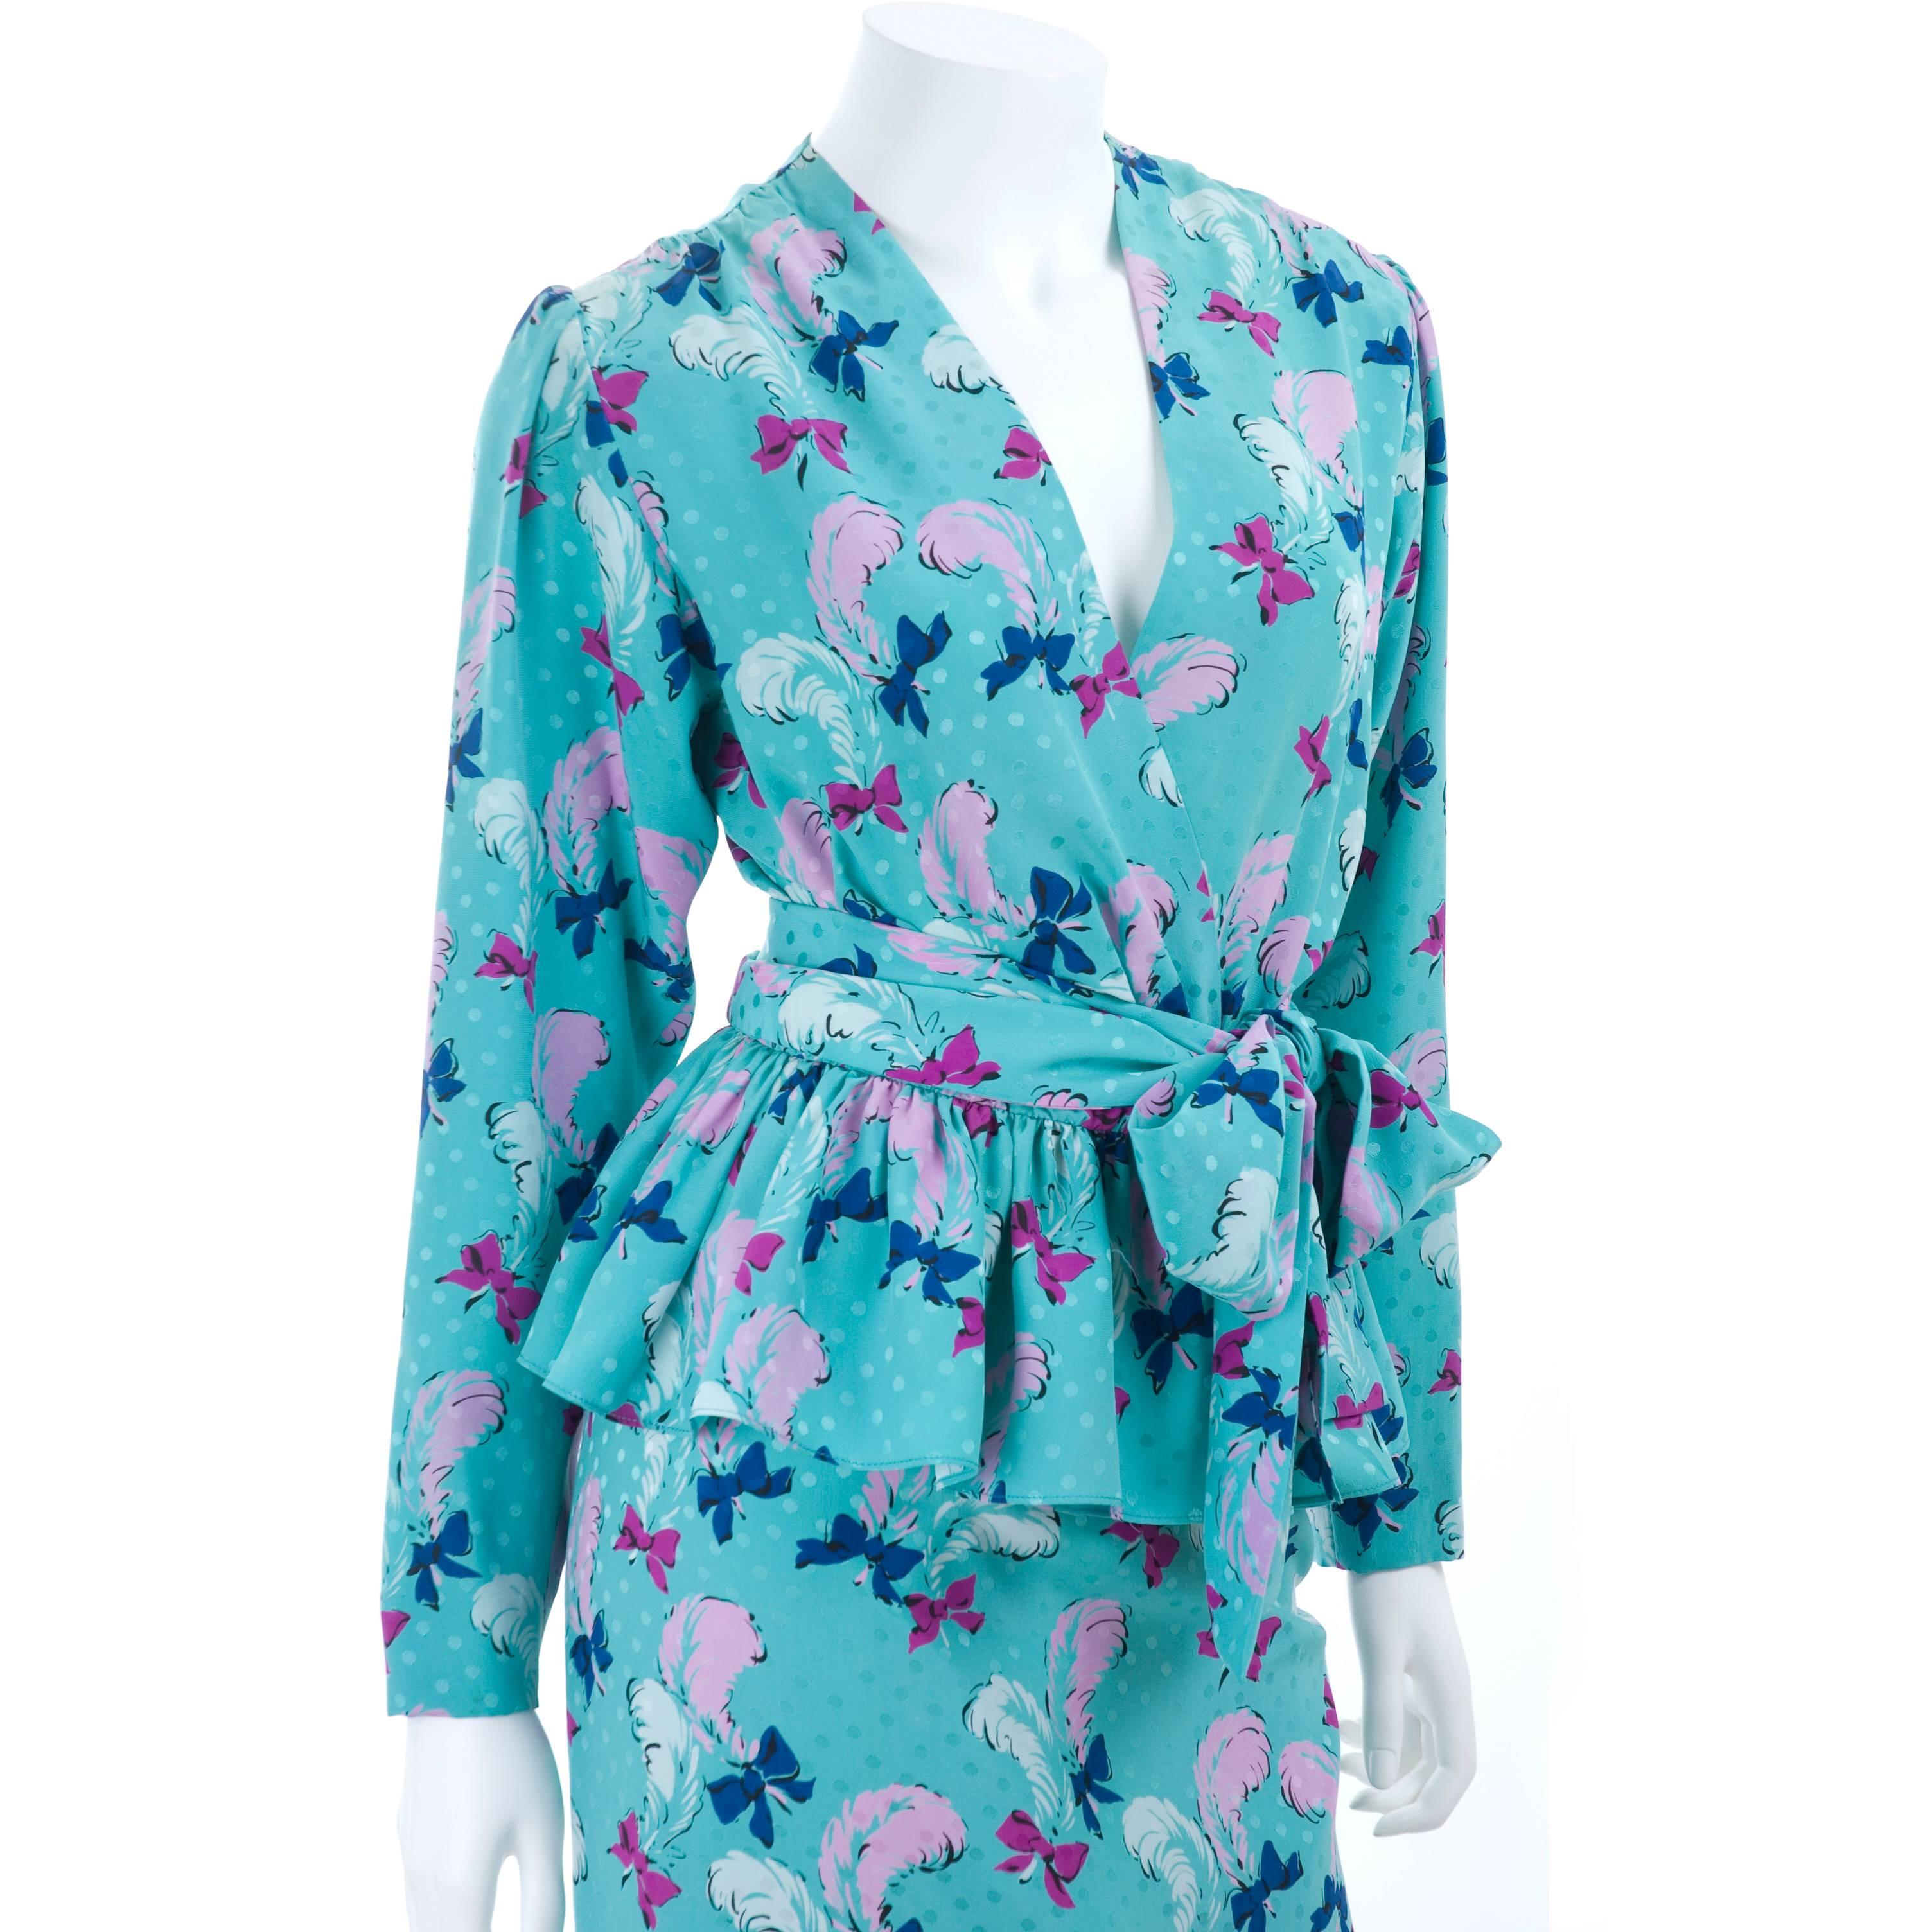 Vintage 1987 Yves Saint Laurent 2 piece silk jacquard dress. Wrap Top with 2 hook closure and attached sash. Turquoise background with white and pink feathers and pink and royal blue bow print.
Size 40 EU 
In excellent condition- no flaws to